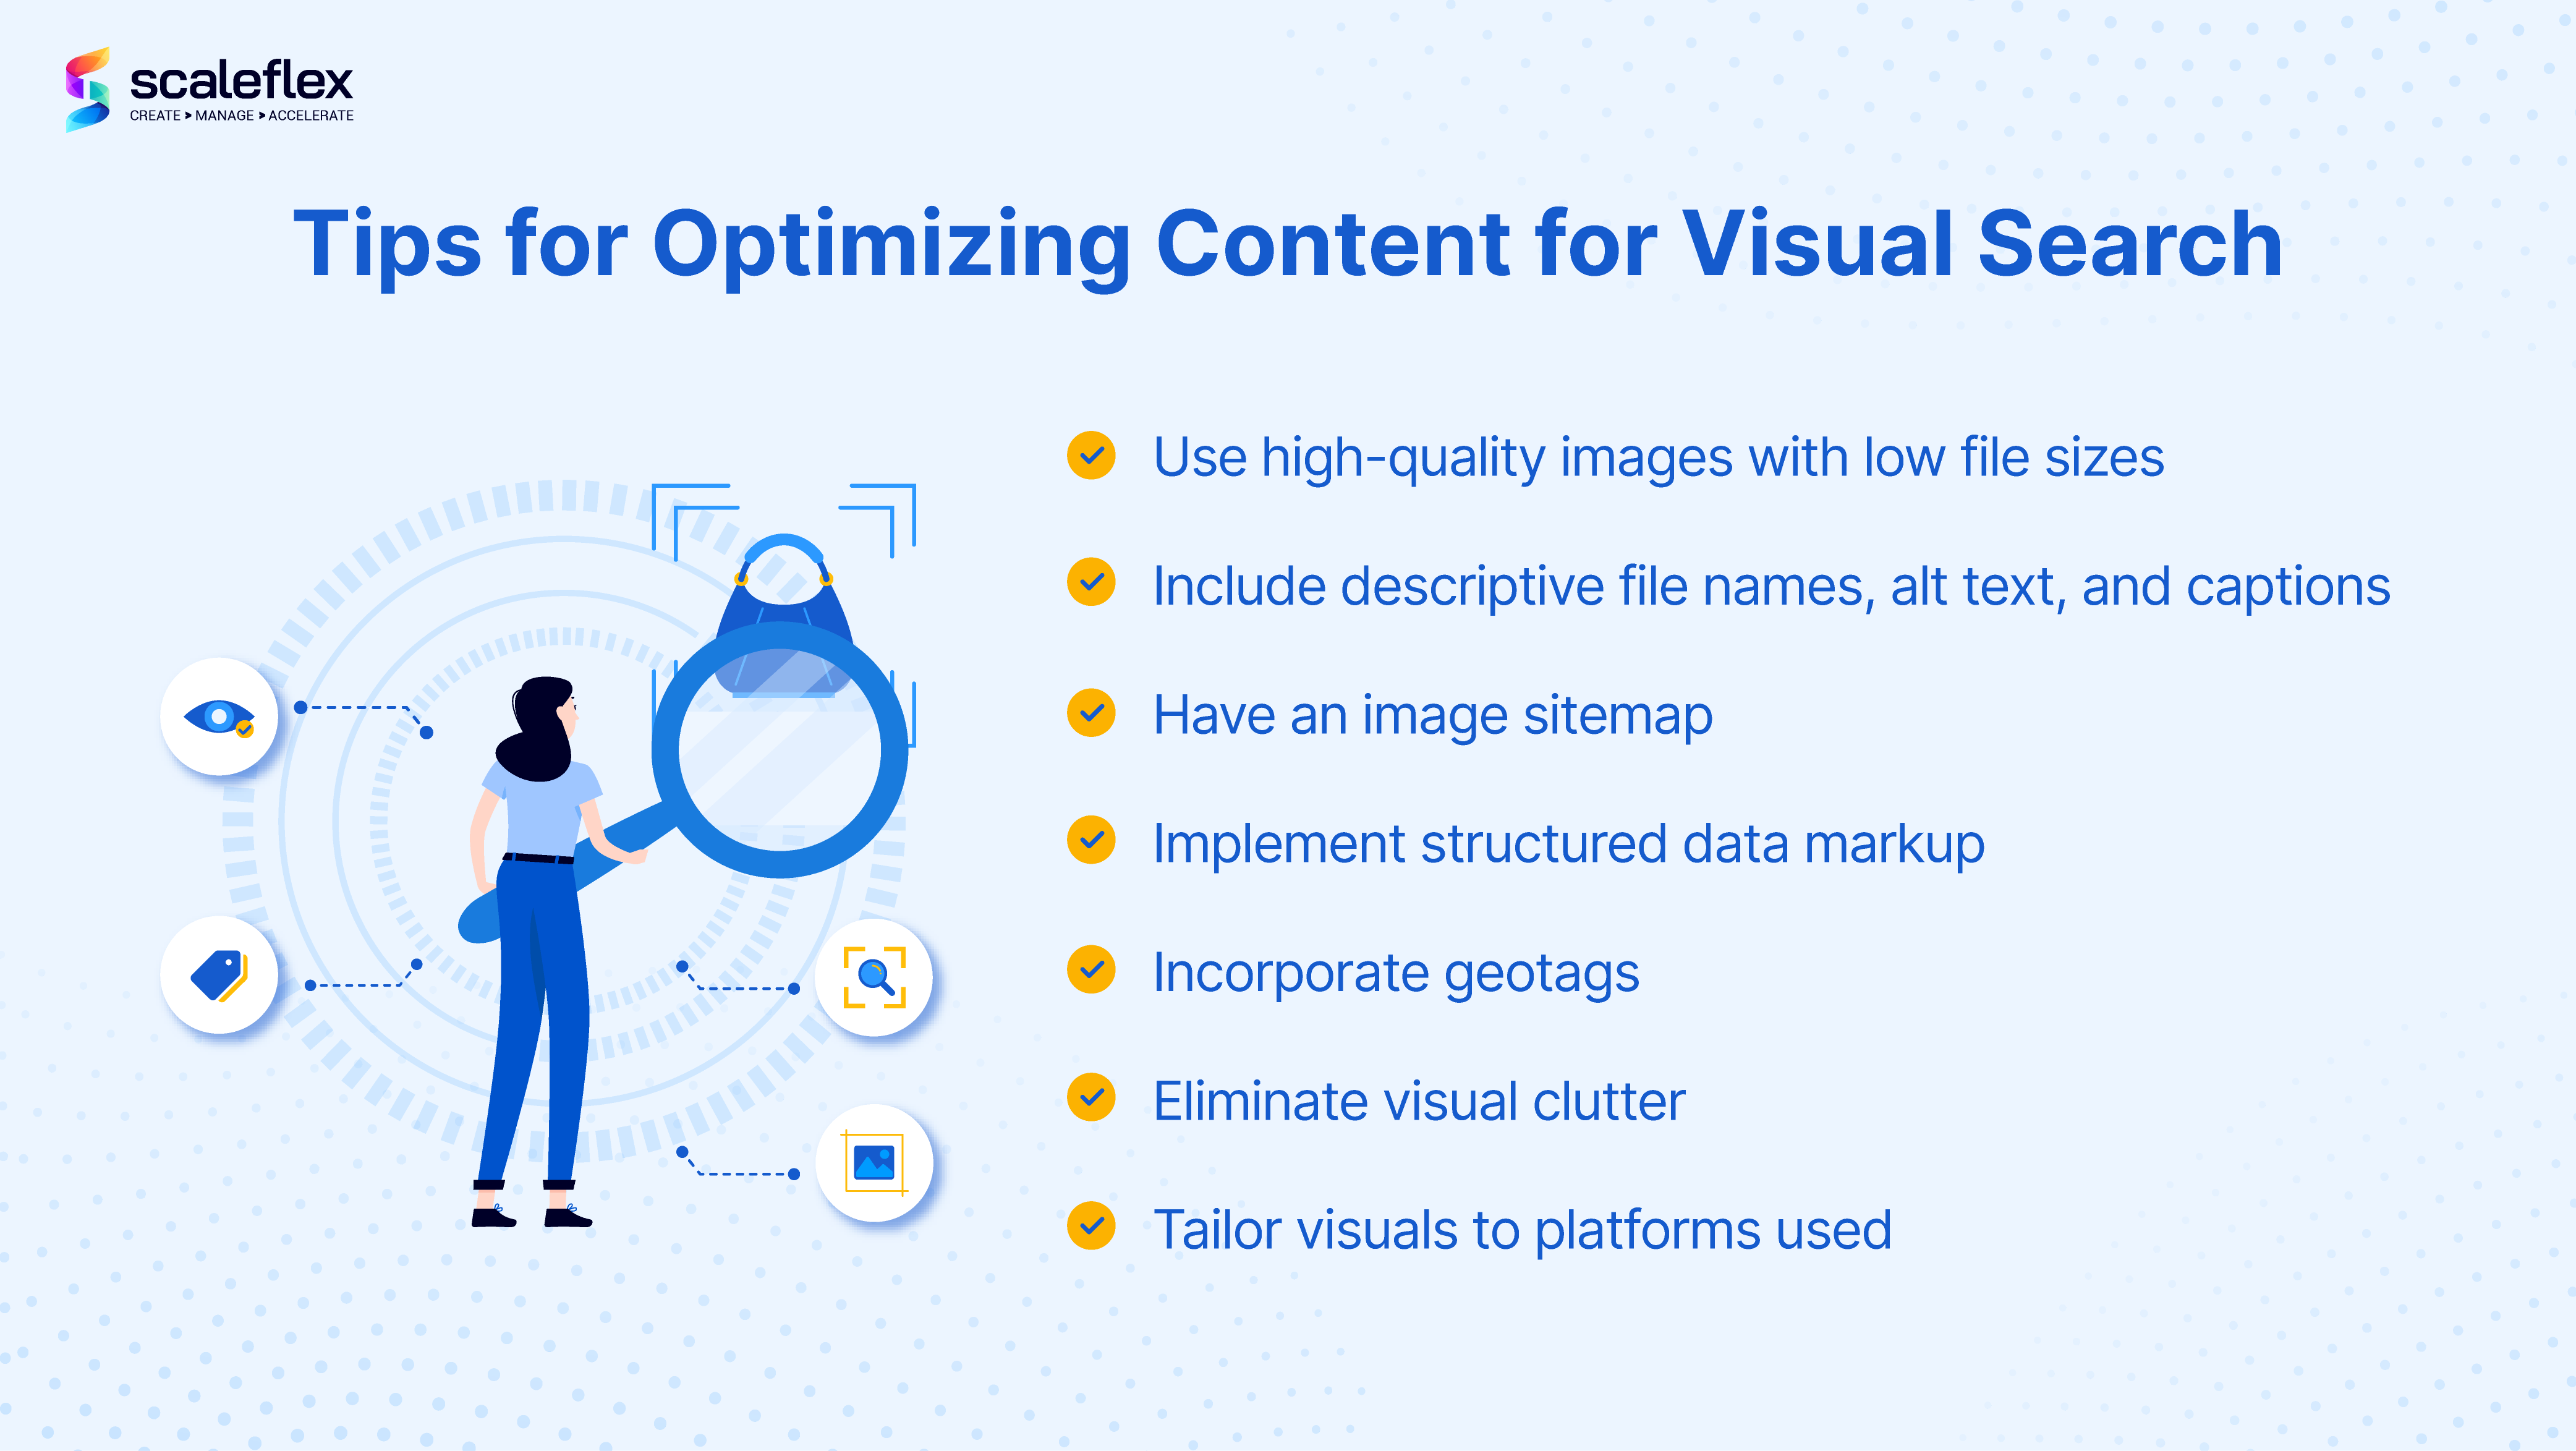 How to optimize for visual search